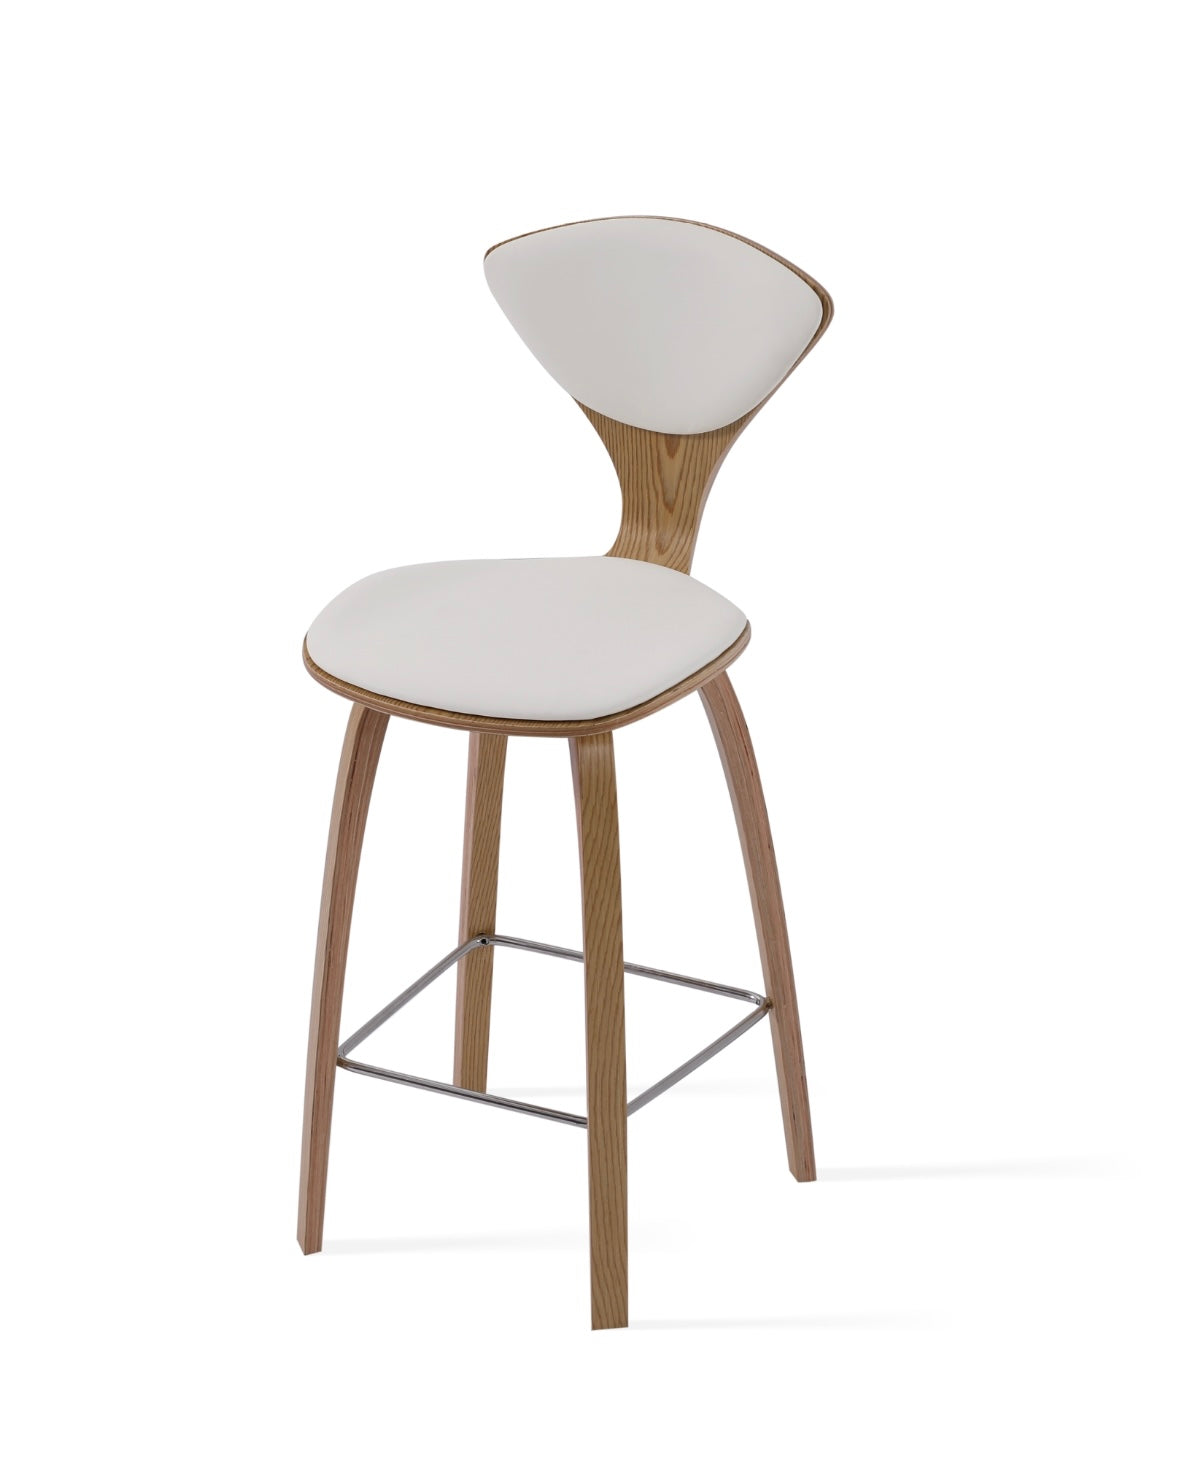 RM counter stools